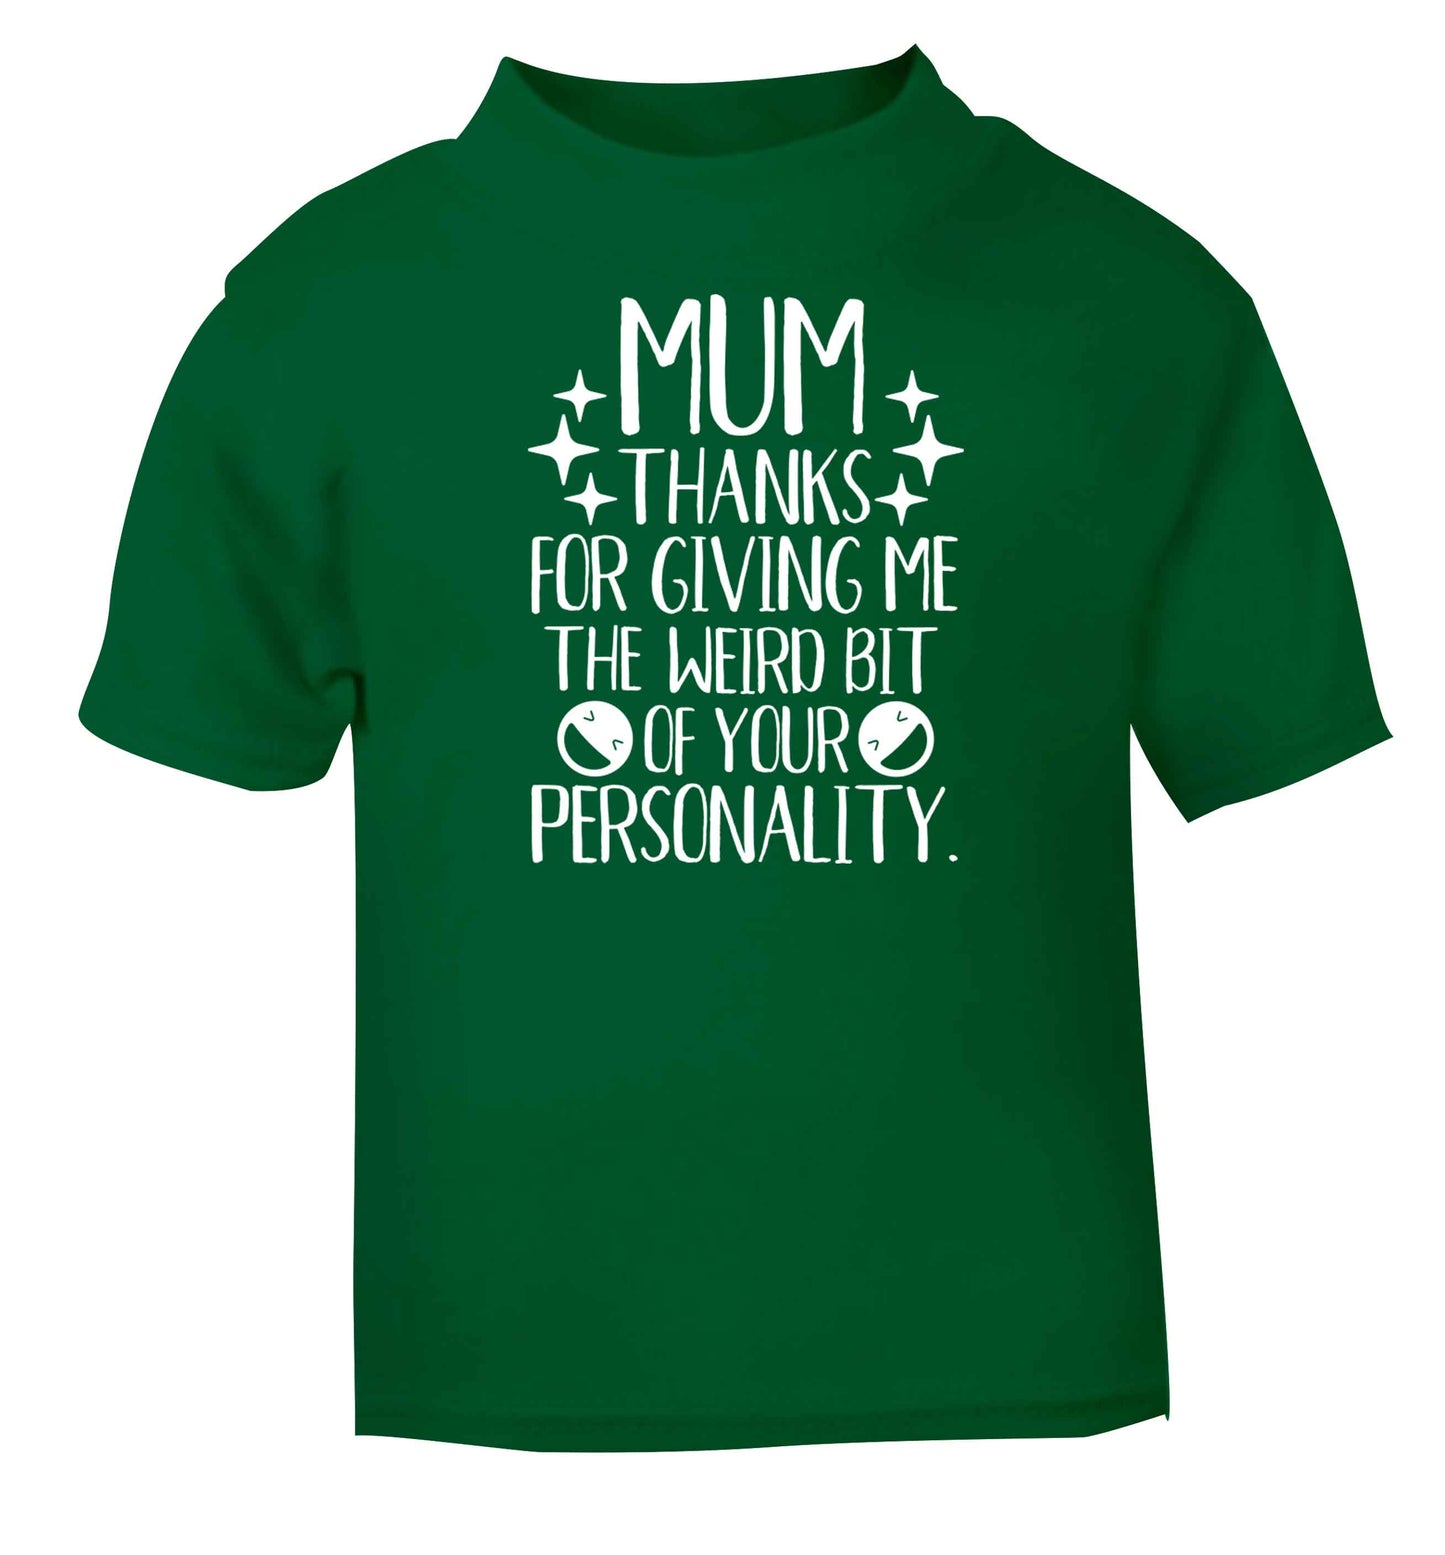 Mum, I love you more than halloumi and if you know me at all you know how deep that is green baby toddler Tshirt 2 Years